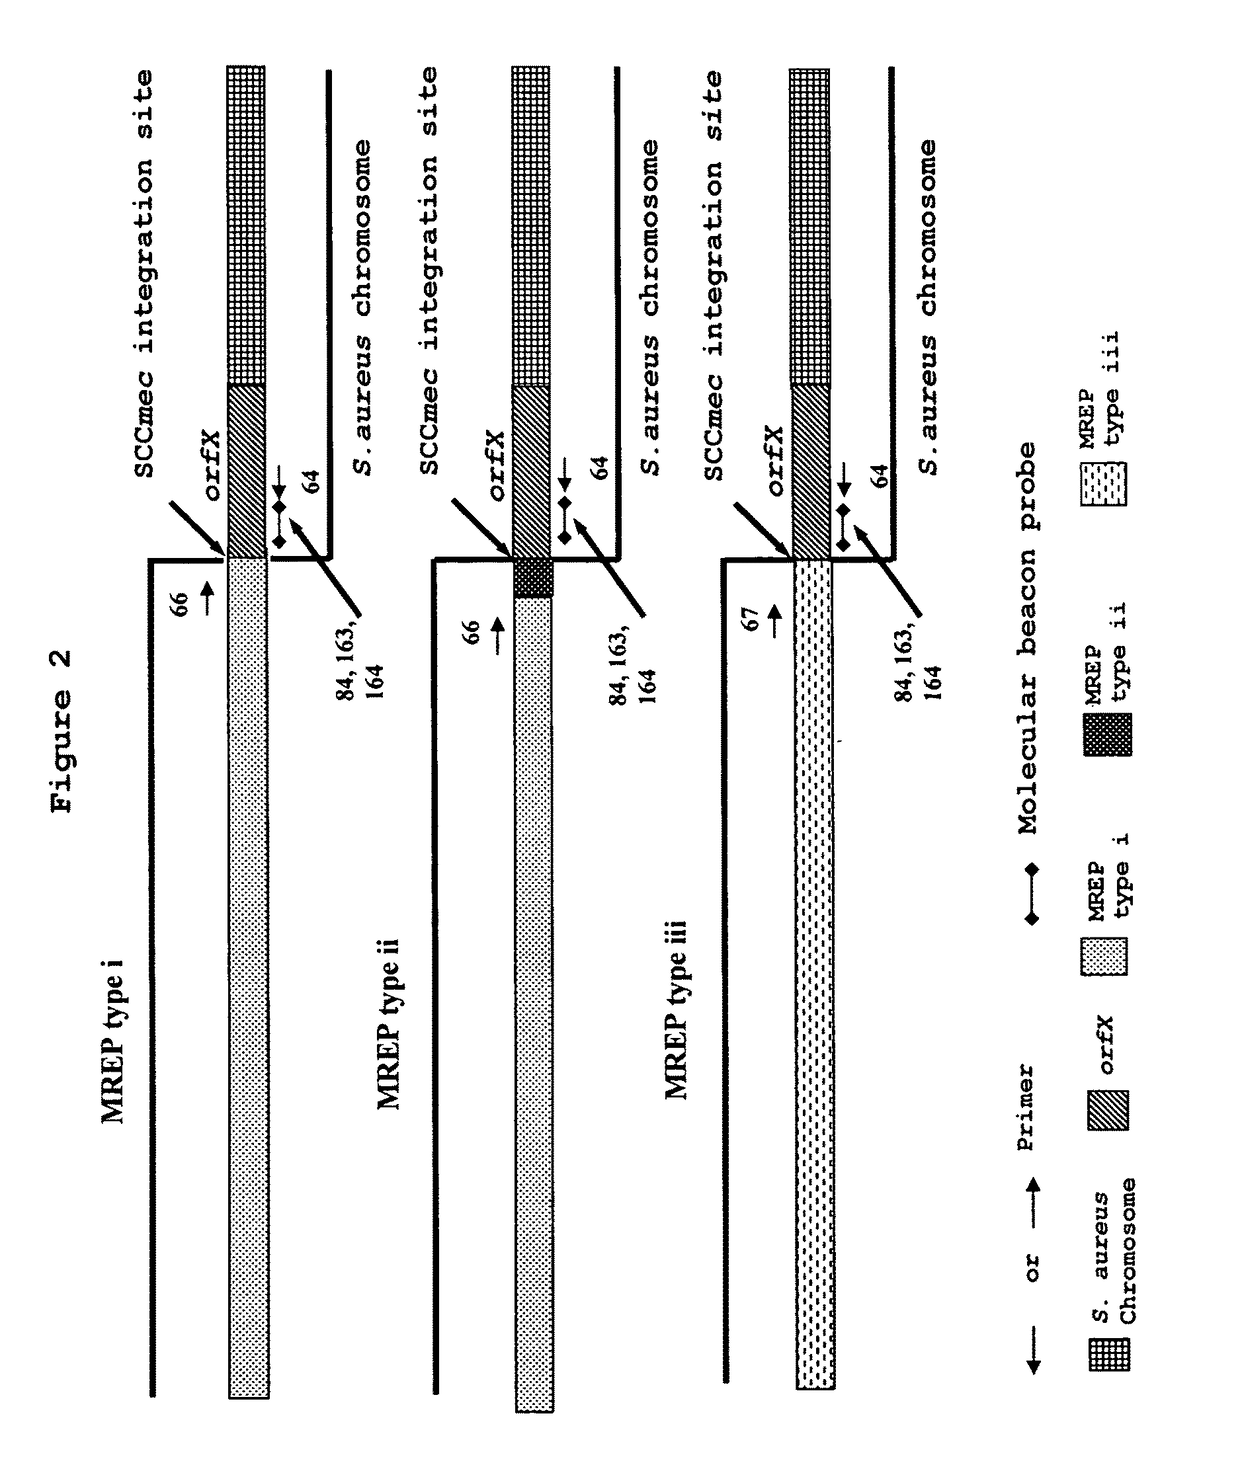 Method for the detection and identification of methicillin-resistant <i>Staphylococcus aureus</i>